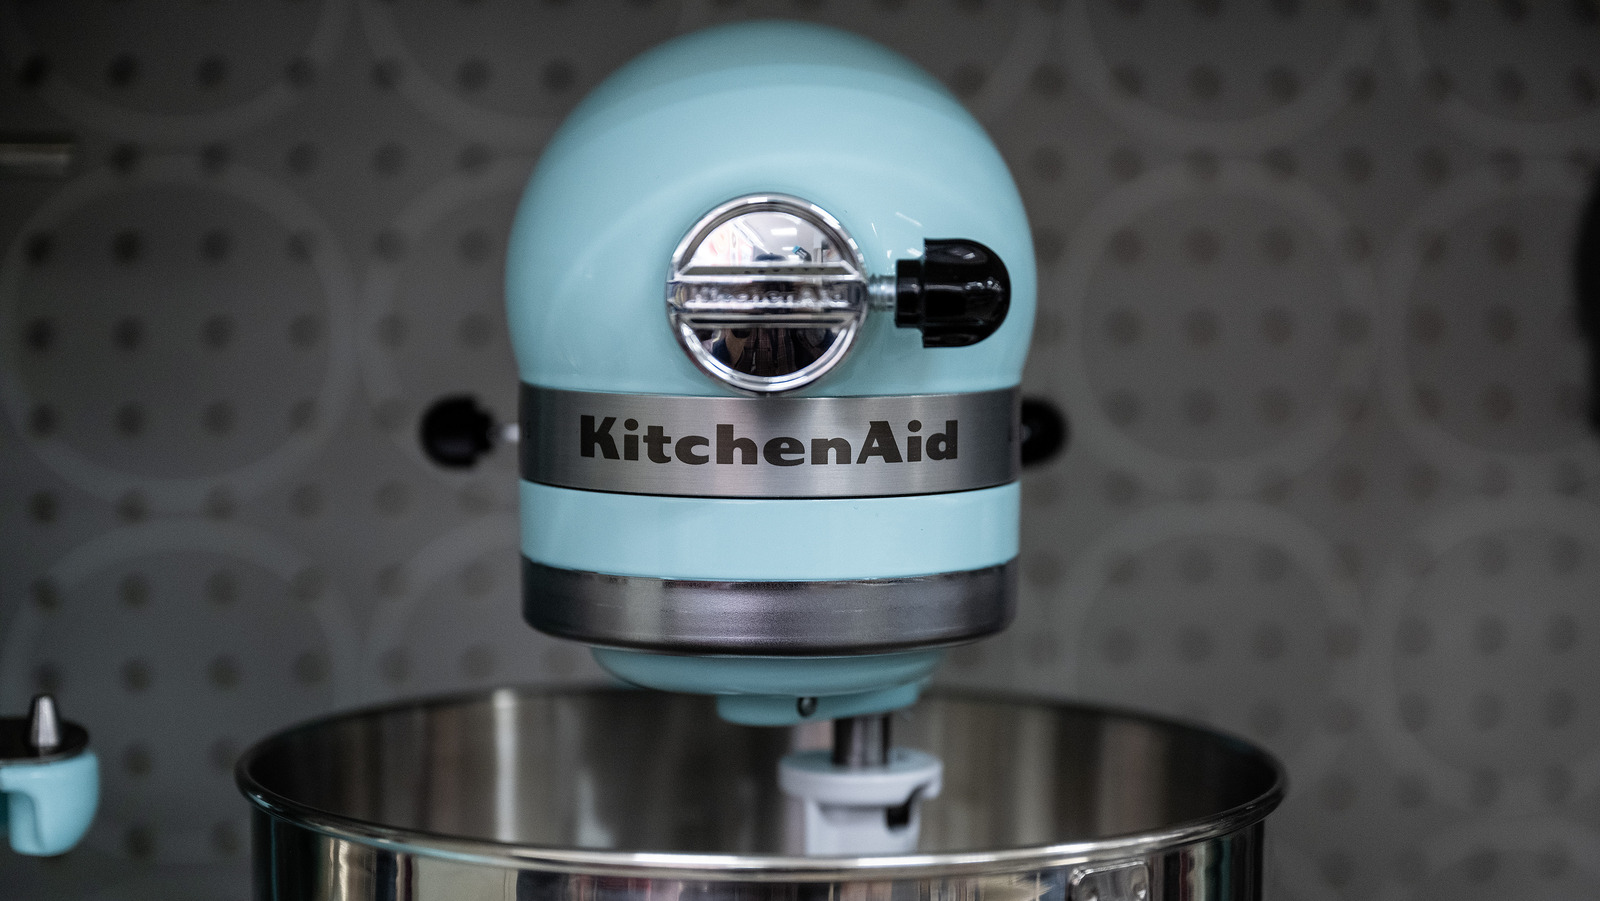 https://www.foodrepublic.com/img/gallery/secrets-about-your-kitchenaid-mixer-youll-wish-you-knew-sooner/l-intro-1698865093.jpg